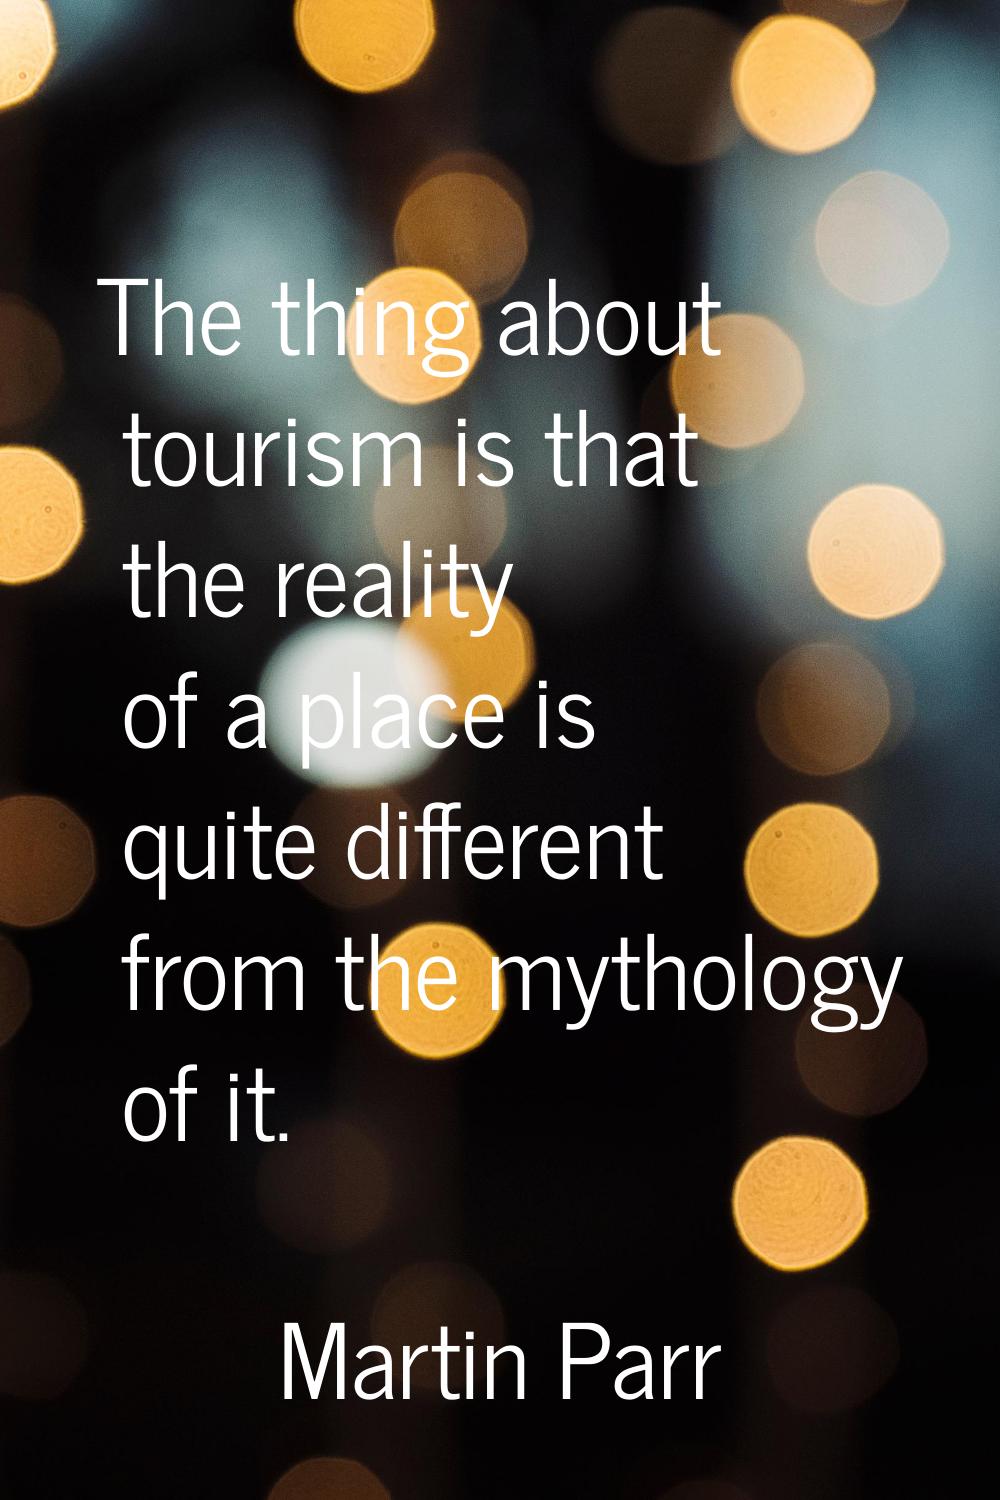 The thing about tourism is that the reality of a place is quite different from the mythology of it.